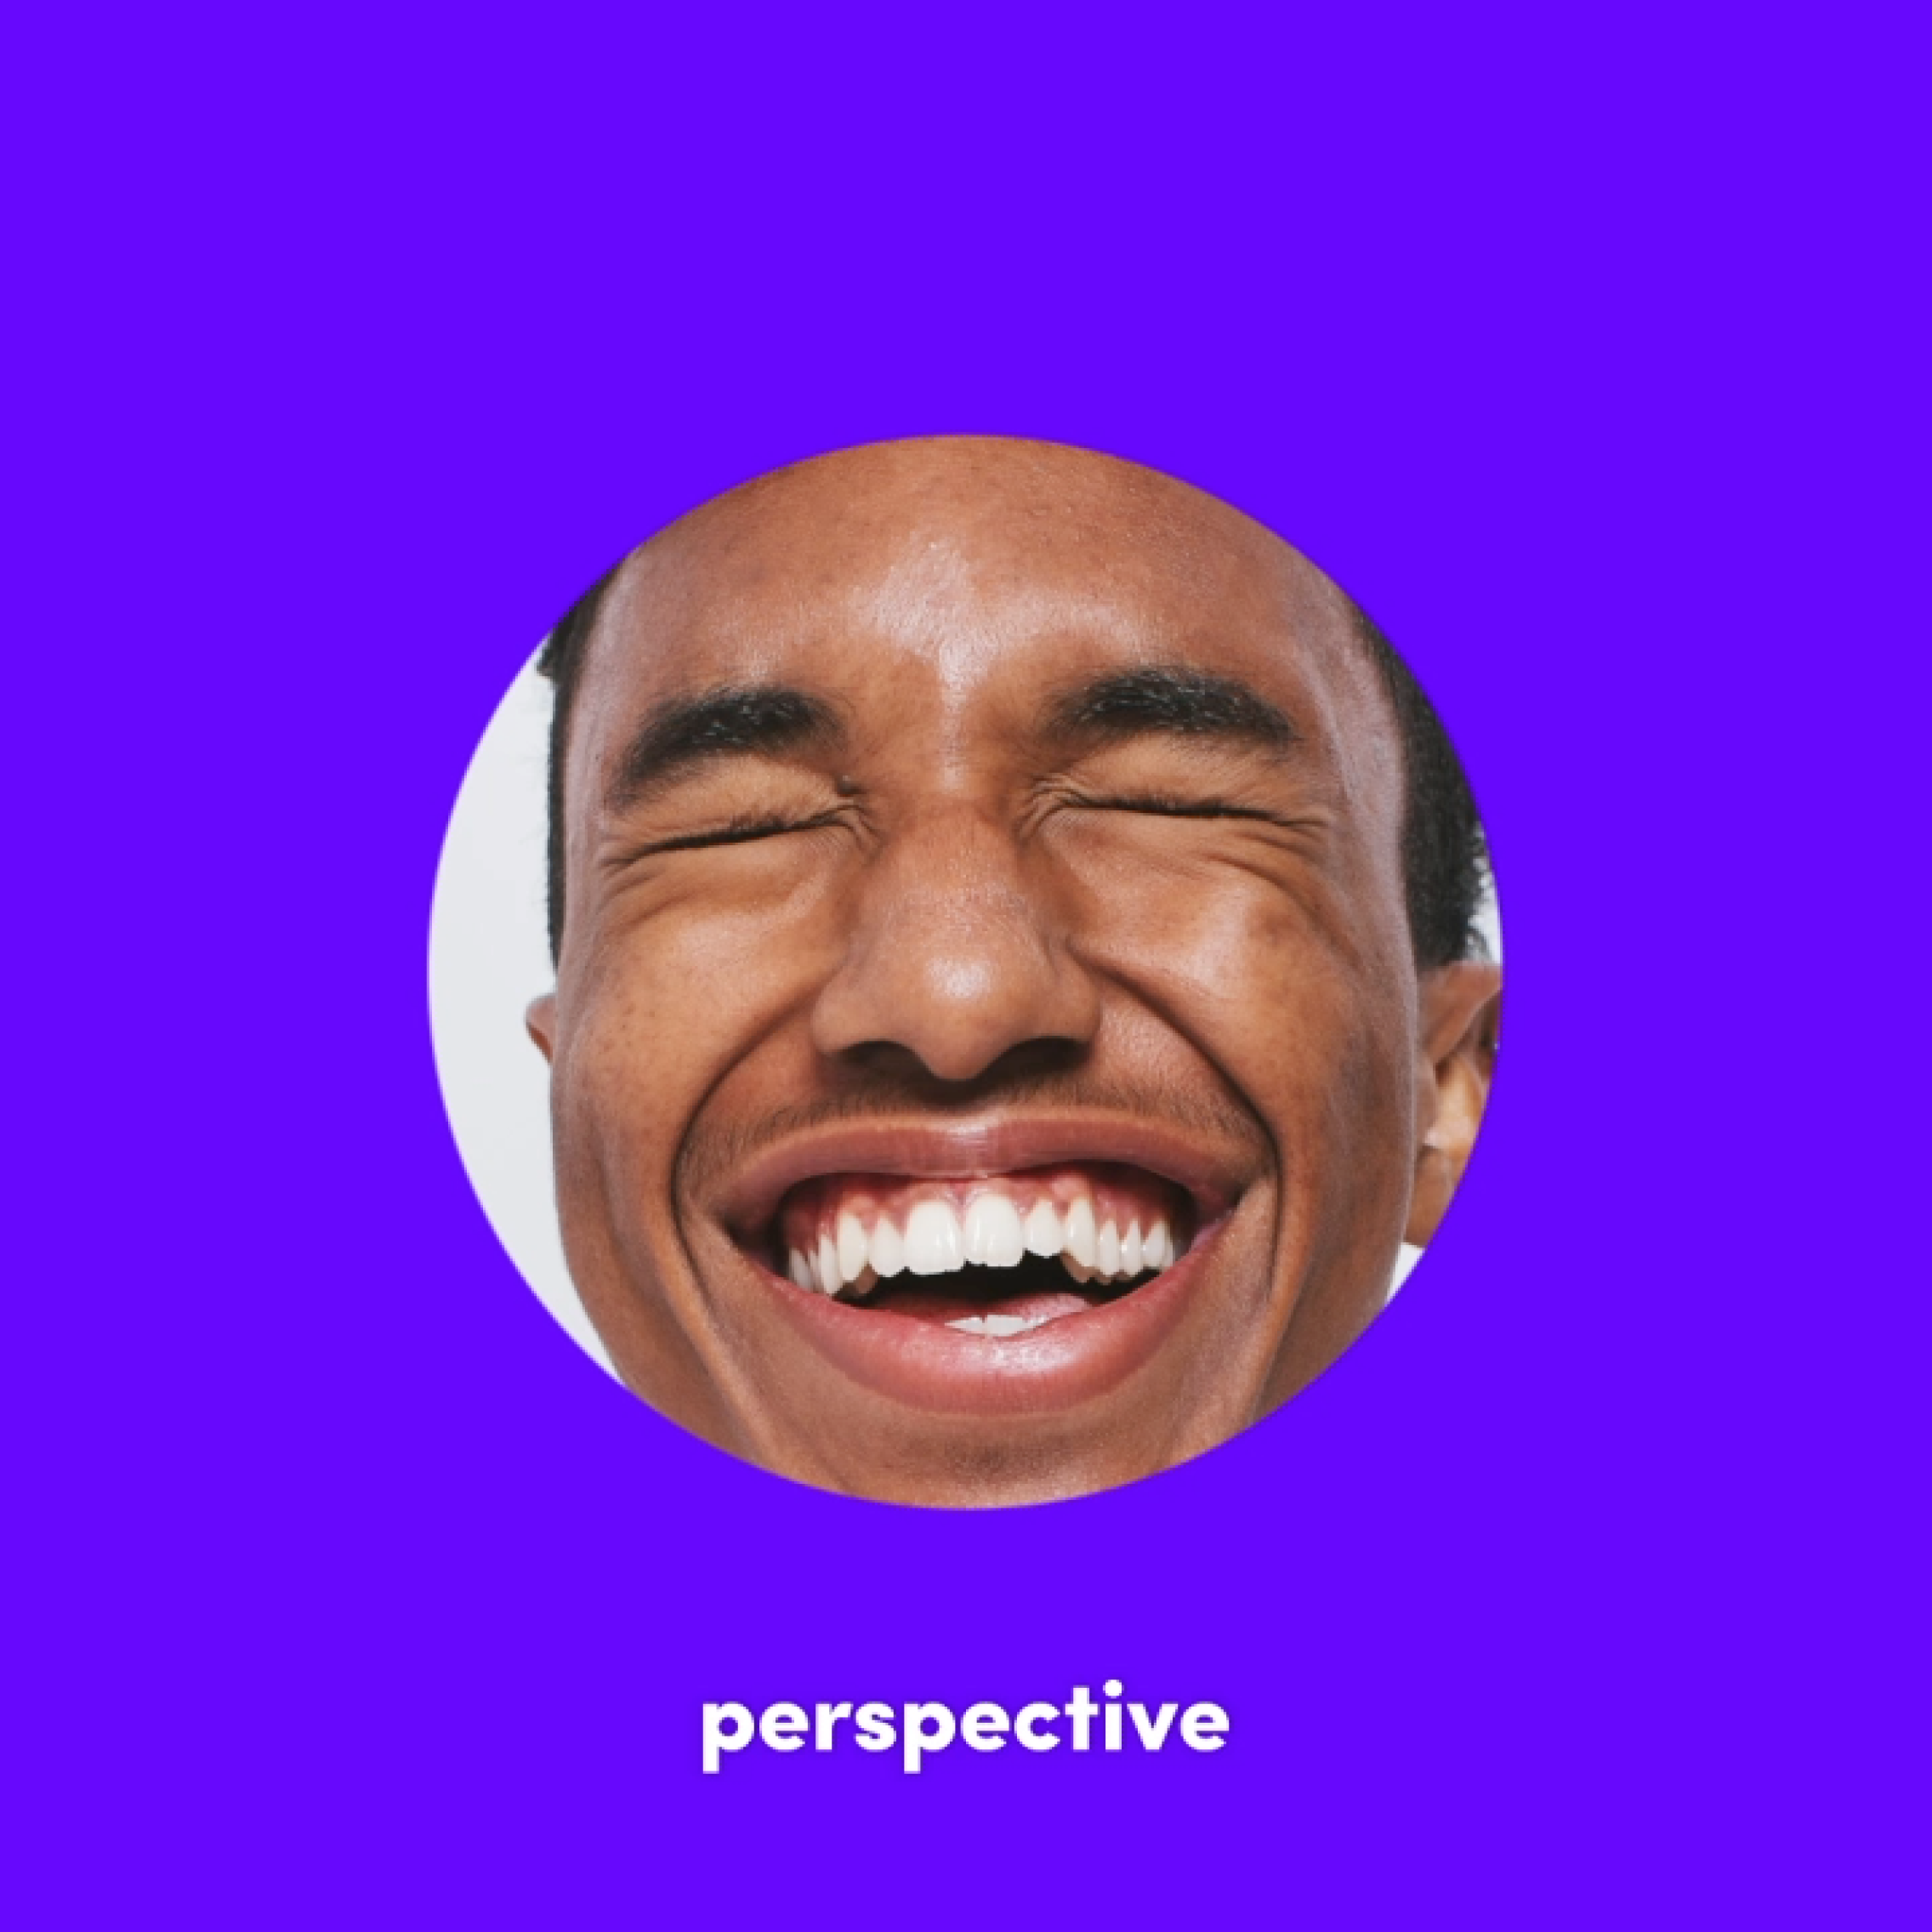 Man smiling with eyes closed and a blurple circle frame in front - Perspective